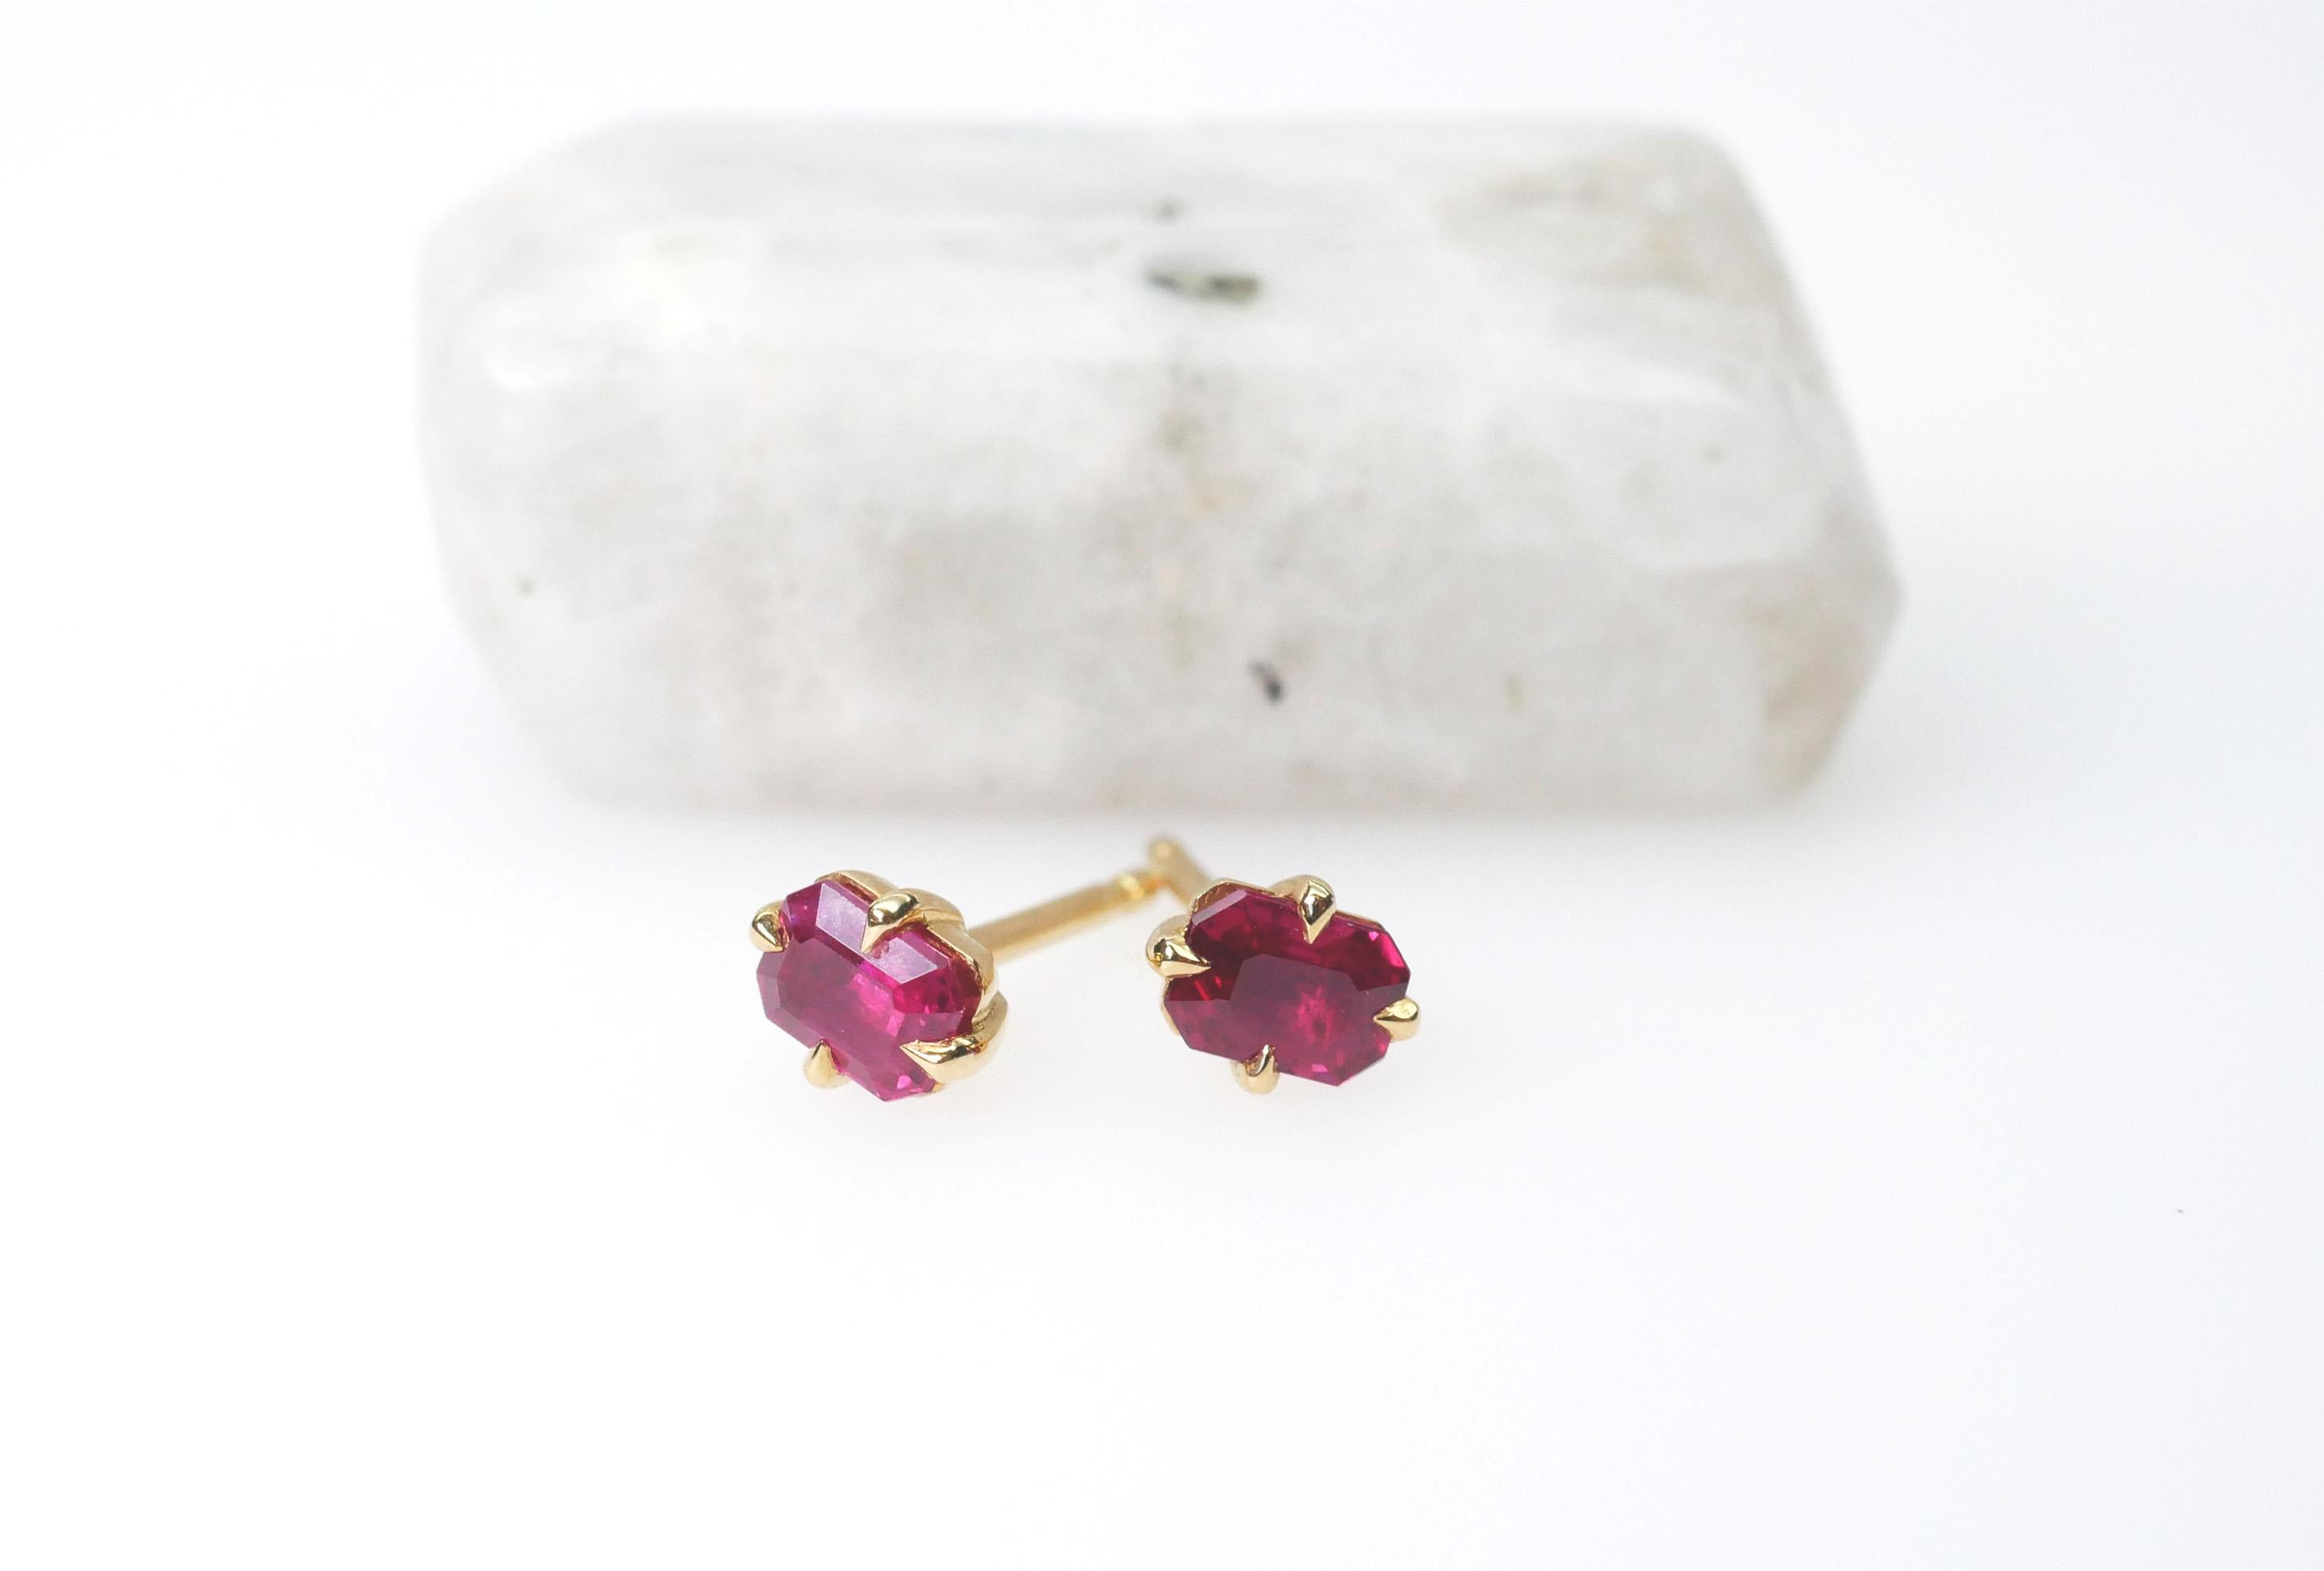 Handmade solitaire bright red octagon ruby stud earrings in 18k yellow gold. Simple and elegant with talon-shaped claws and and close back setting, perfect to wear solo or stacked.

Total Ruby Weight 2/0.95 Carats